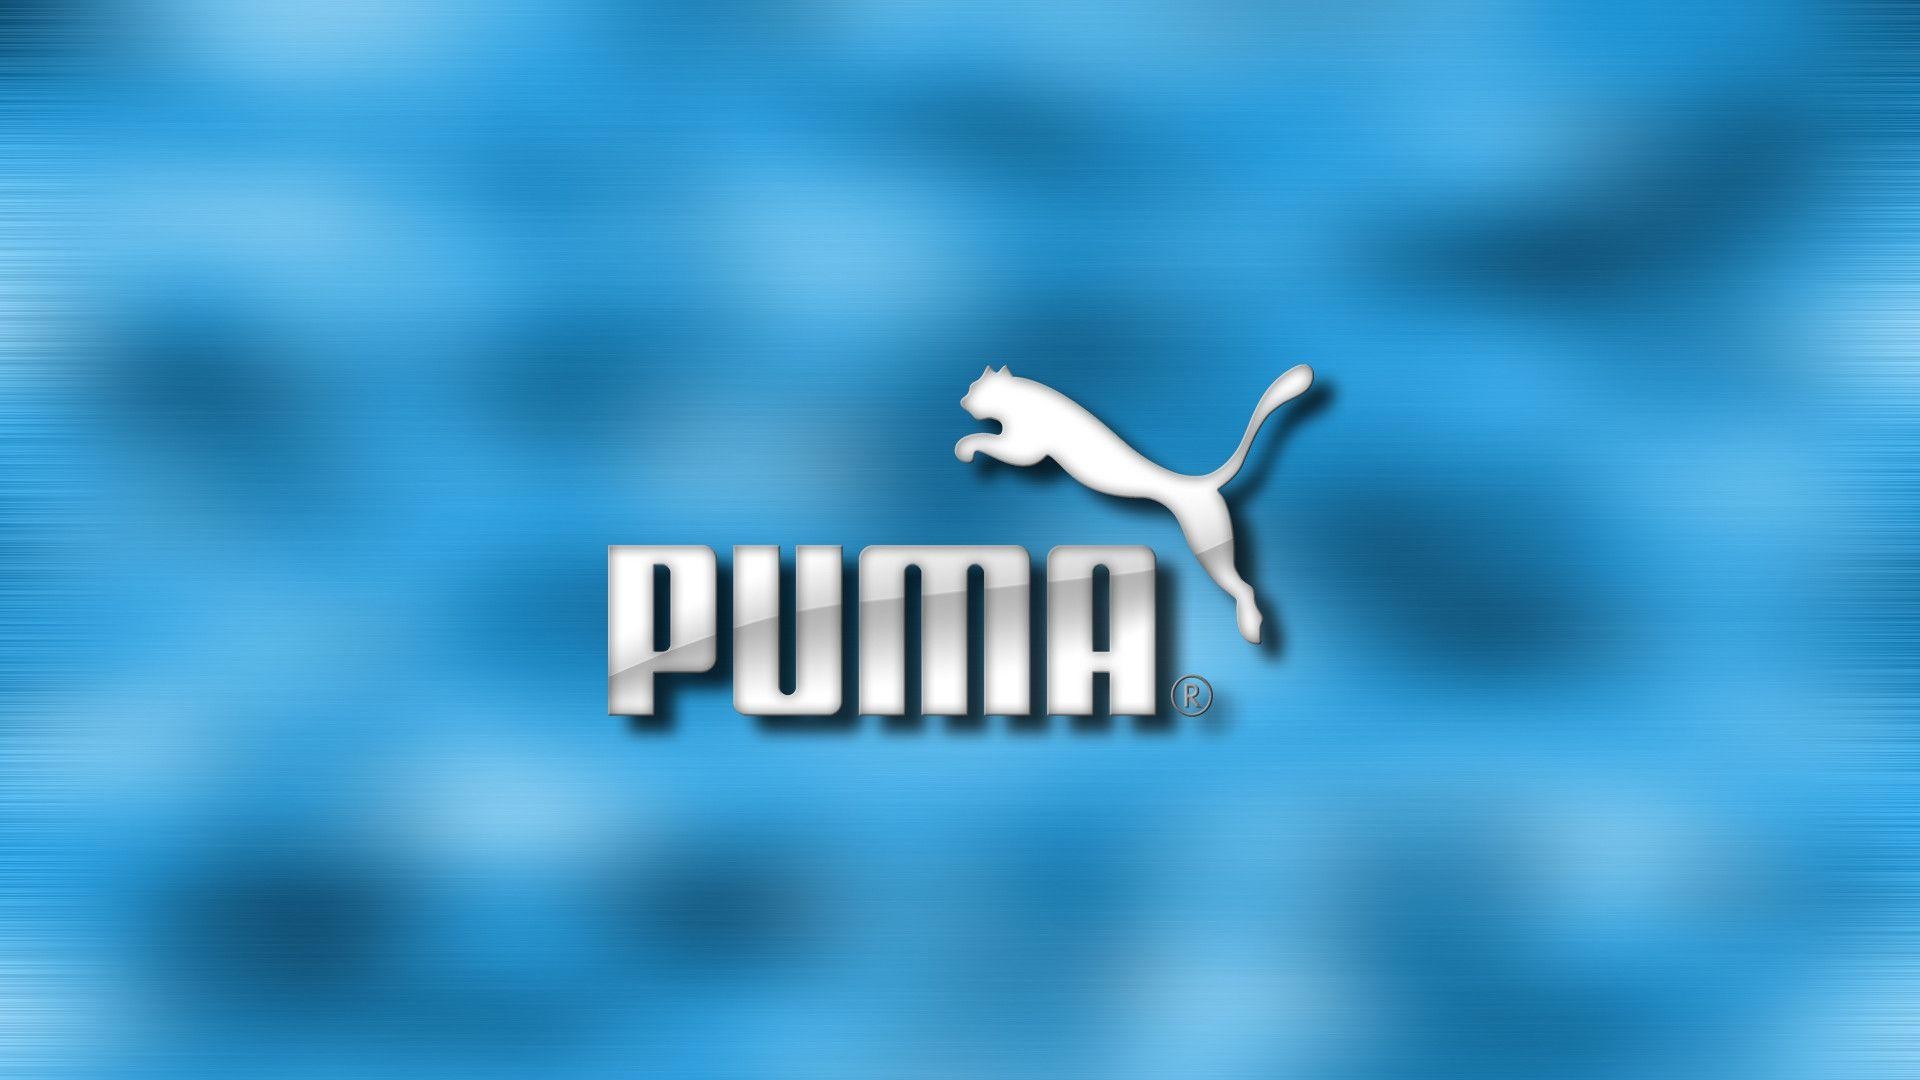 PreviousNext. Previous Image Next Image. puma wallpapers pictures images